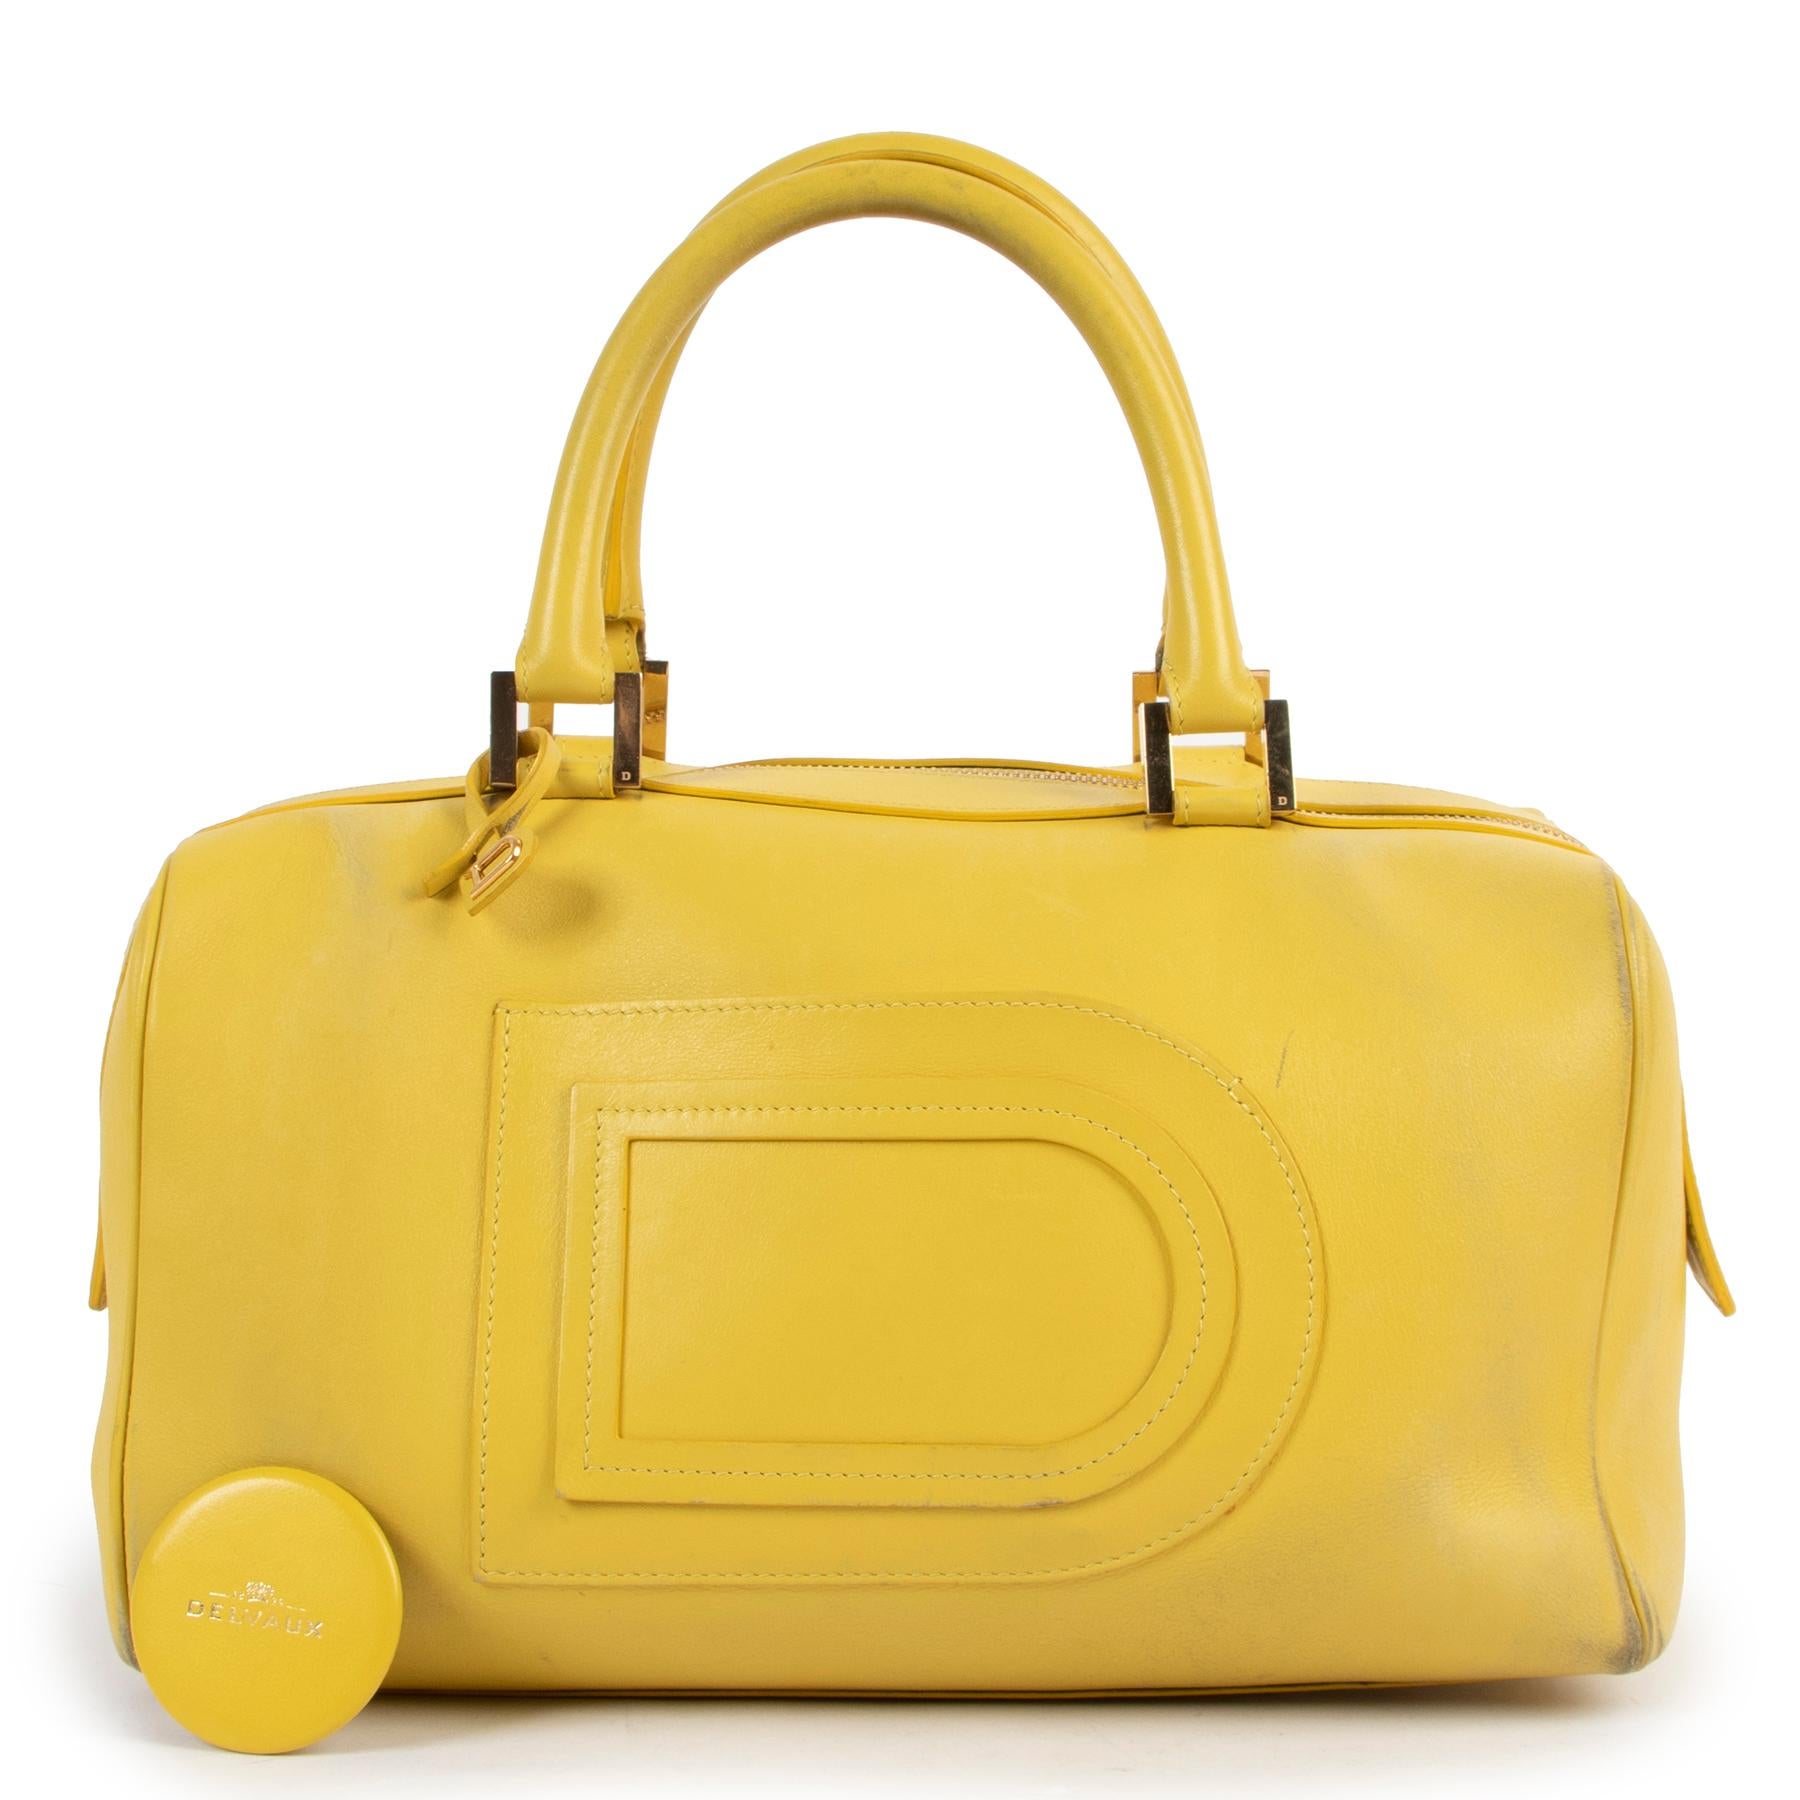 Never out of Style - Delvaux Louise Baudrier crossbody bag